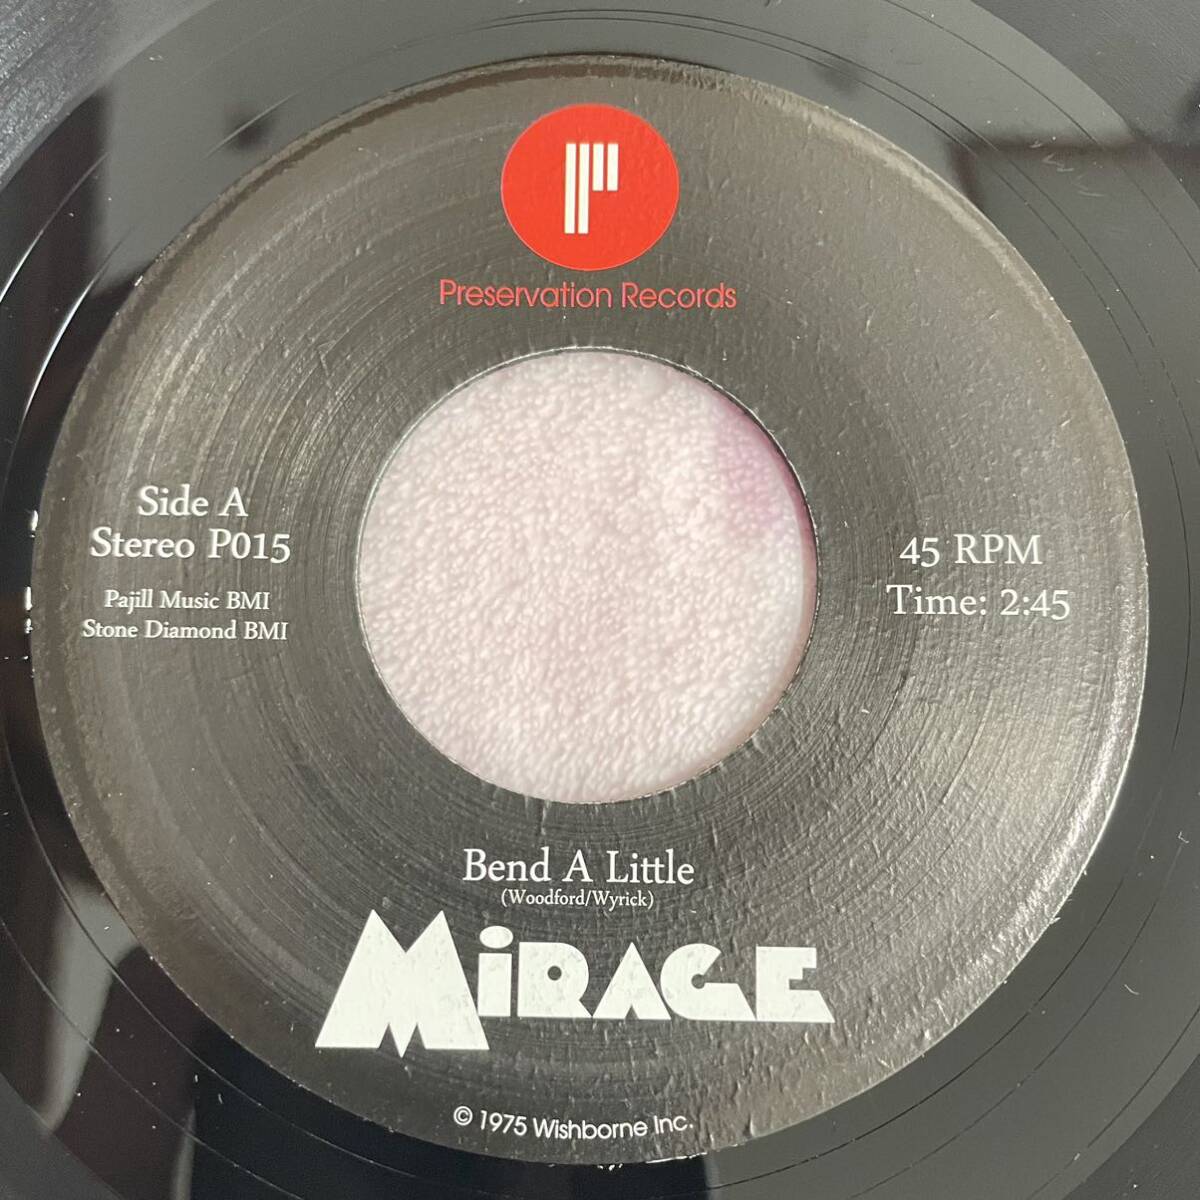 【7inch】◆即決◆中古■【MIRAGE / Bend A Little / I've Got The Notion】7インチ EP■P015 free soul funk aor light mellow Supremesの画像1